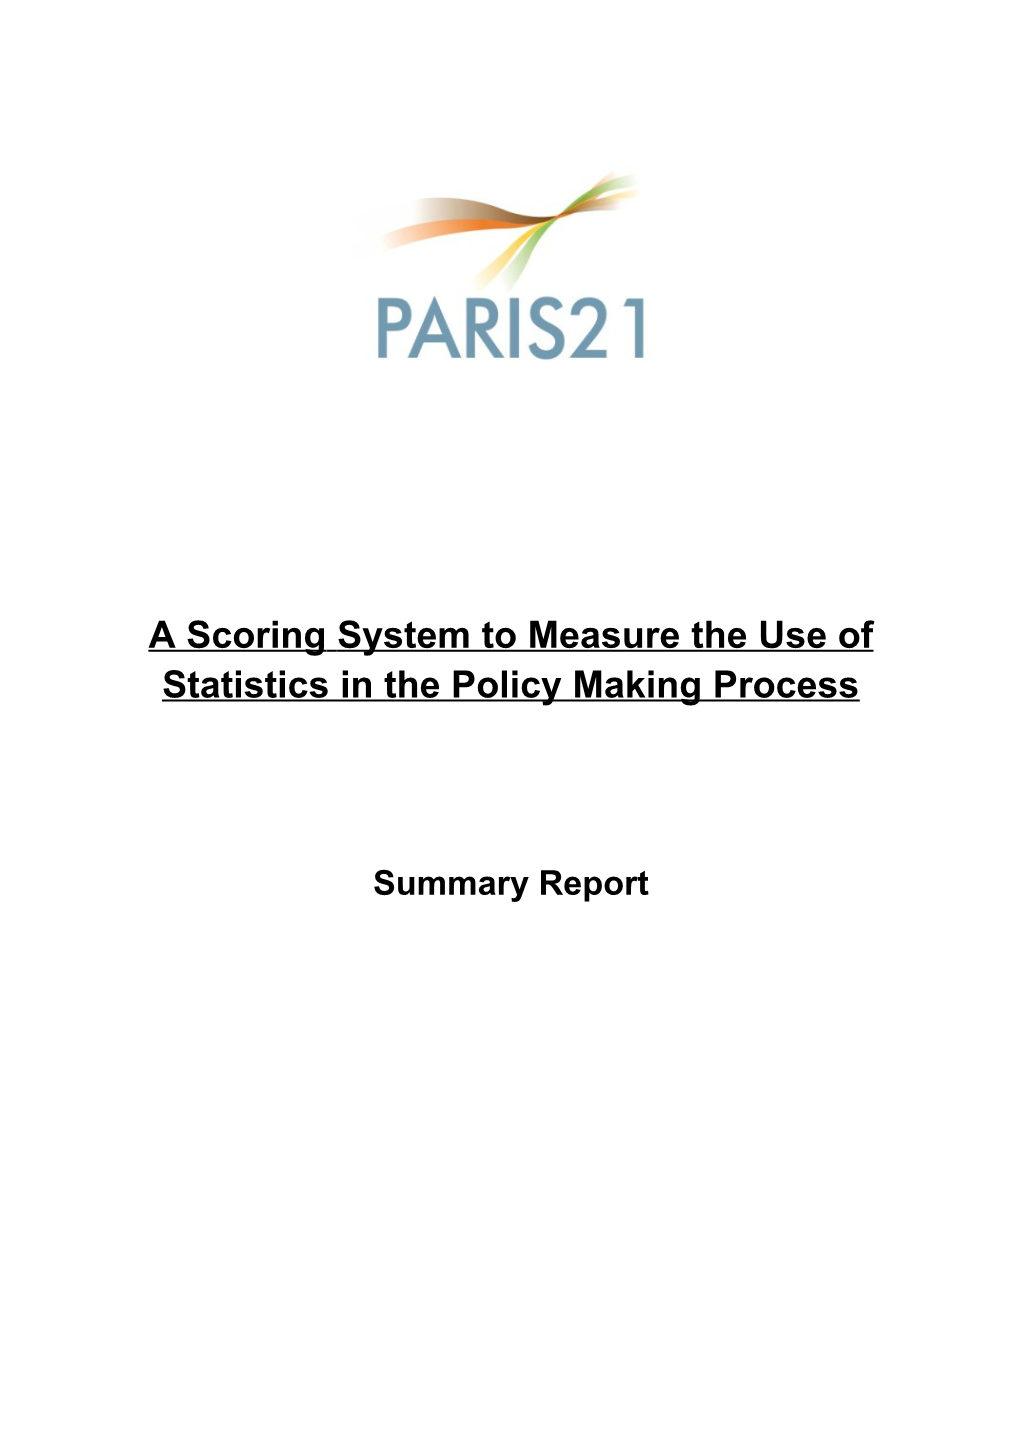 A Scoringsystem to Measure the Use of Statistics in the Policy Making Process